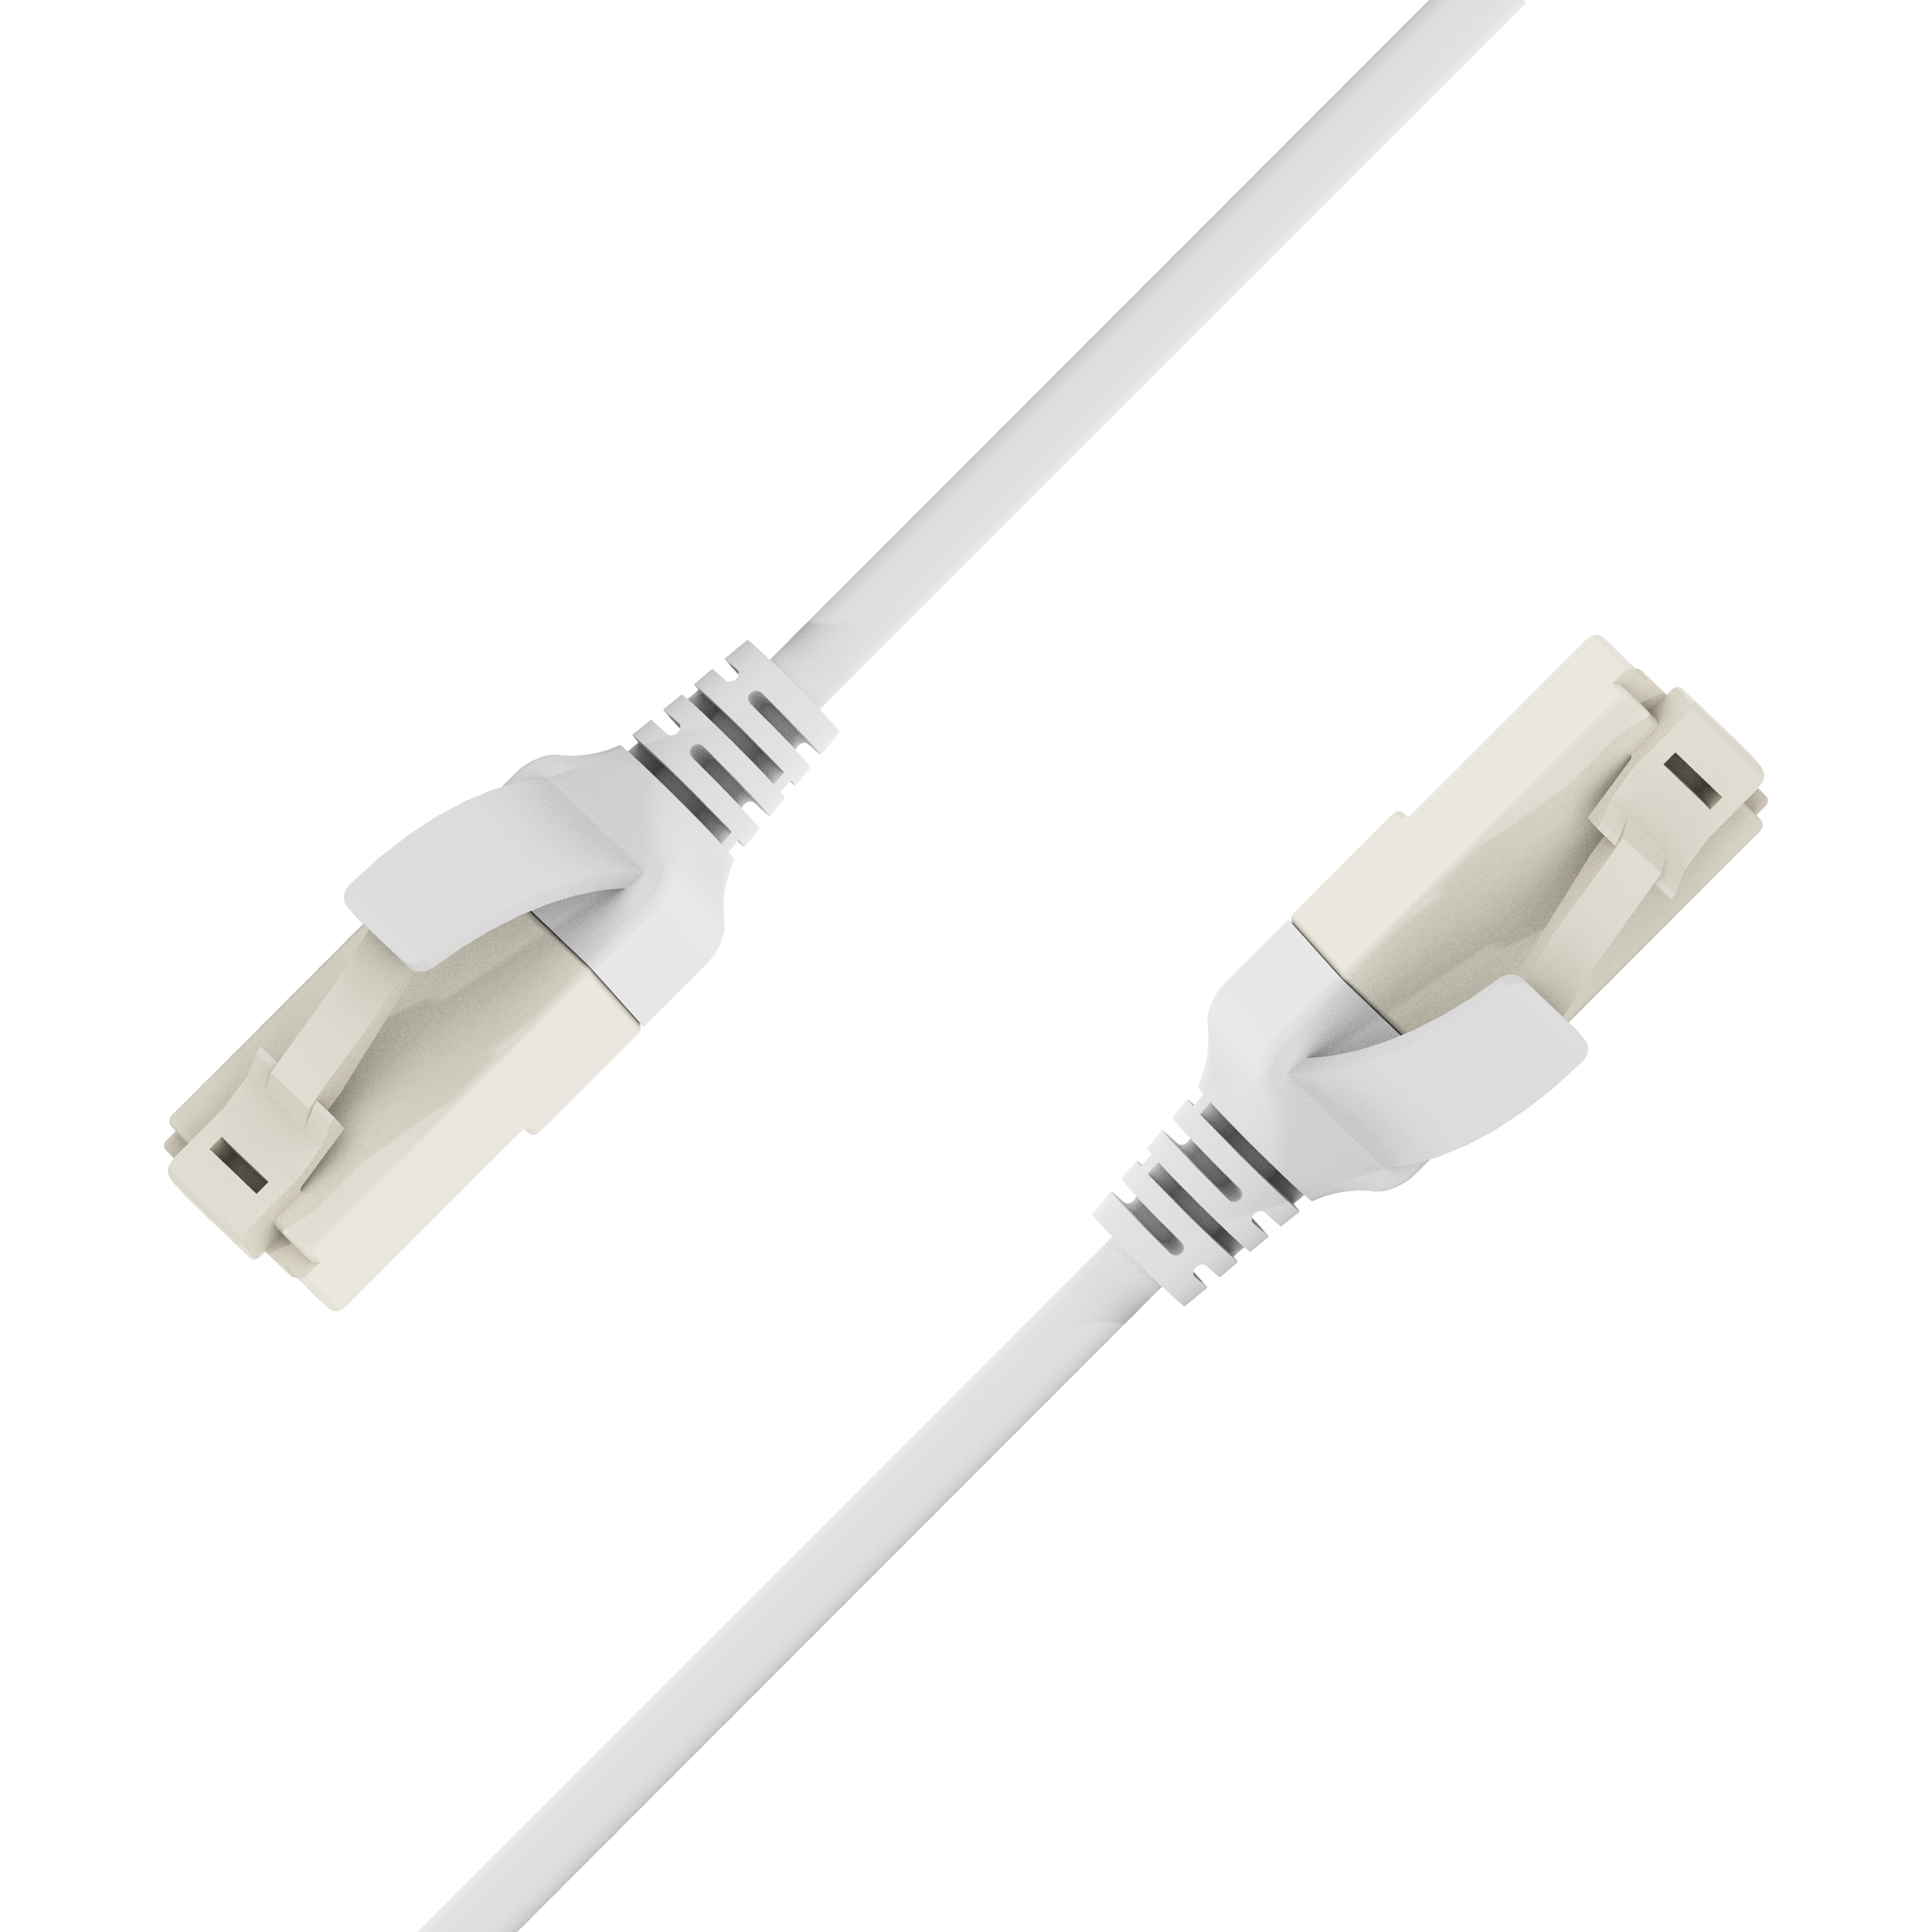 Antibacterial HealthLAN Cat.6A Slim 28AWG U/UTP Patch Cable Behpex Cable